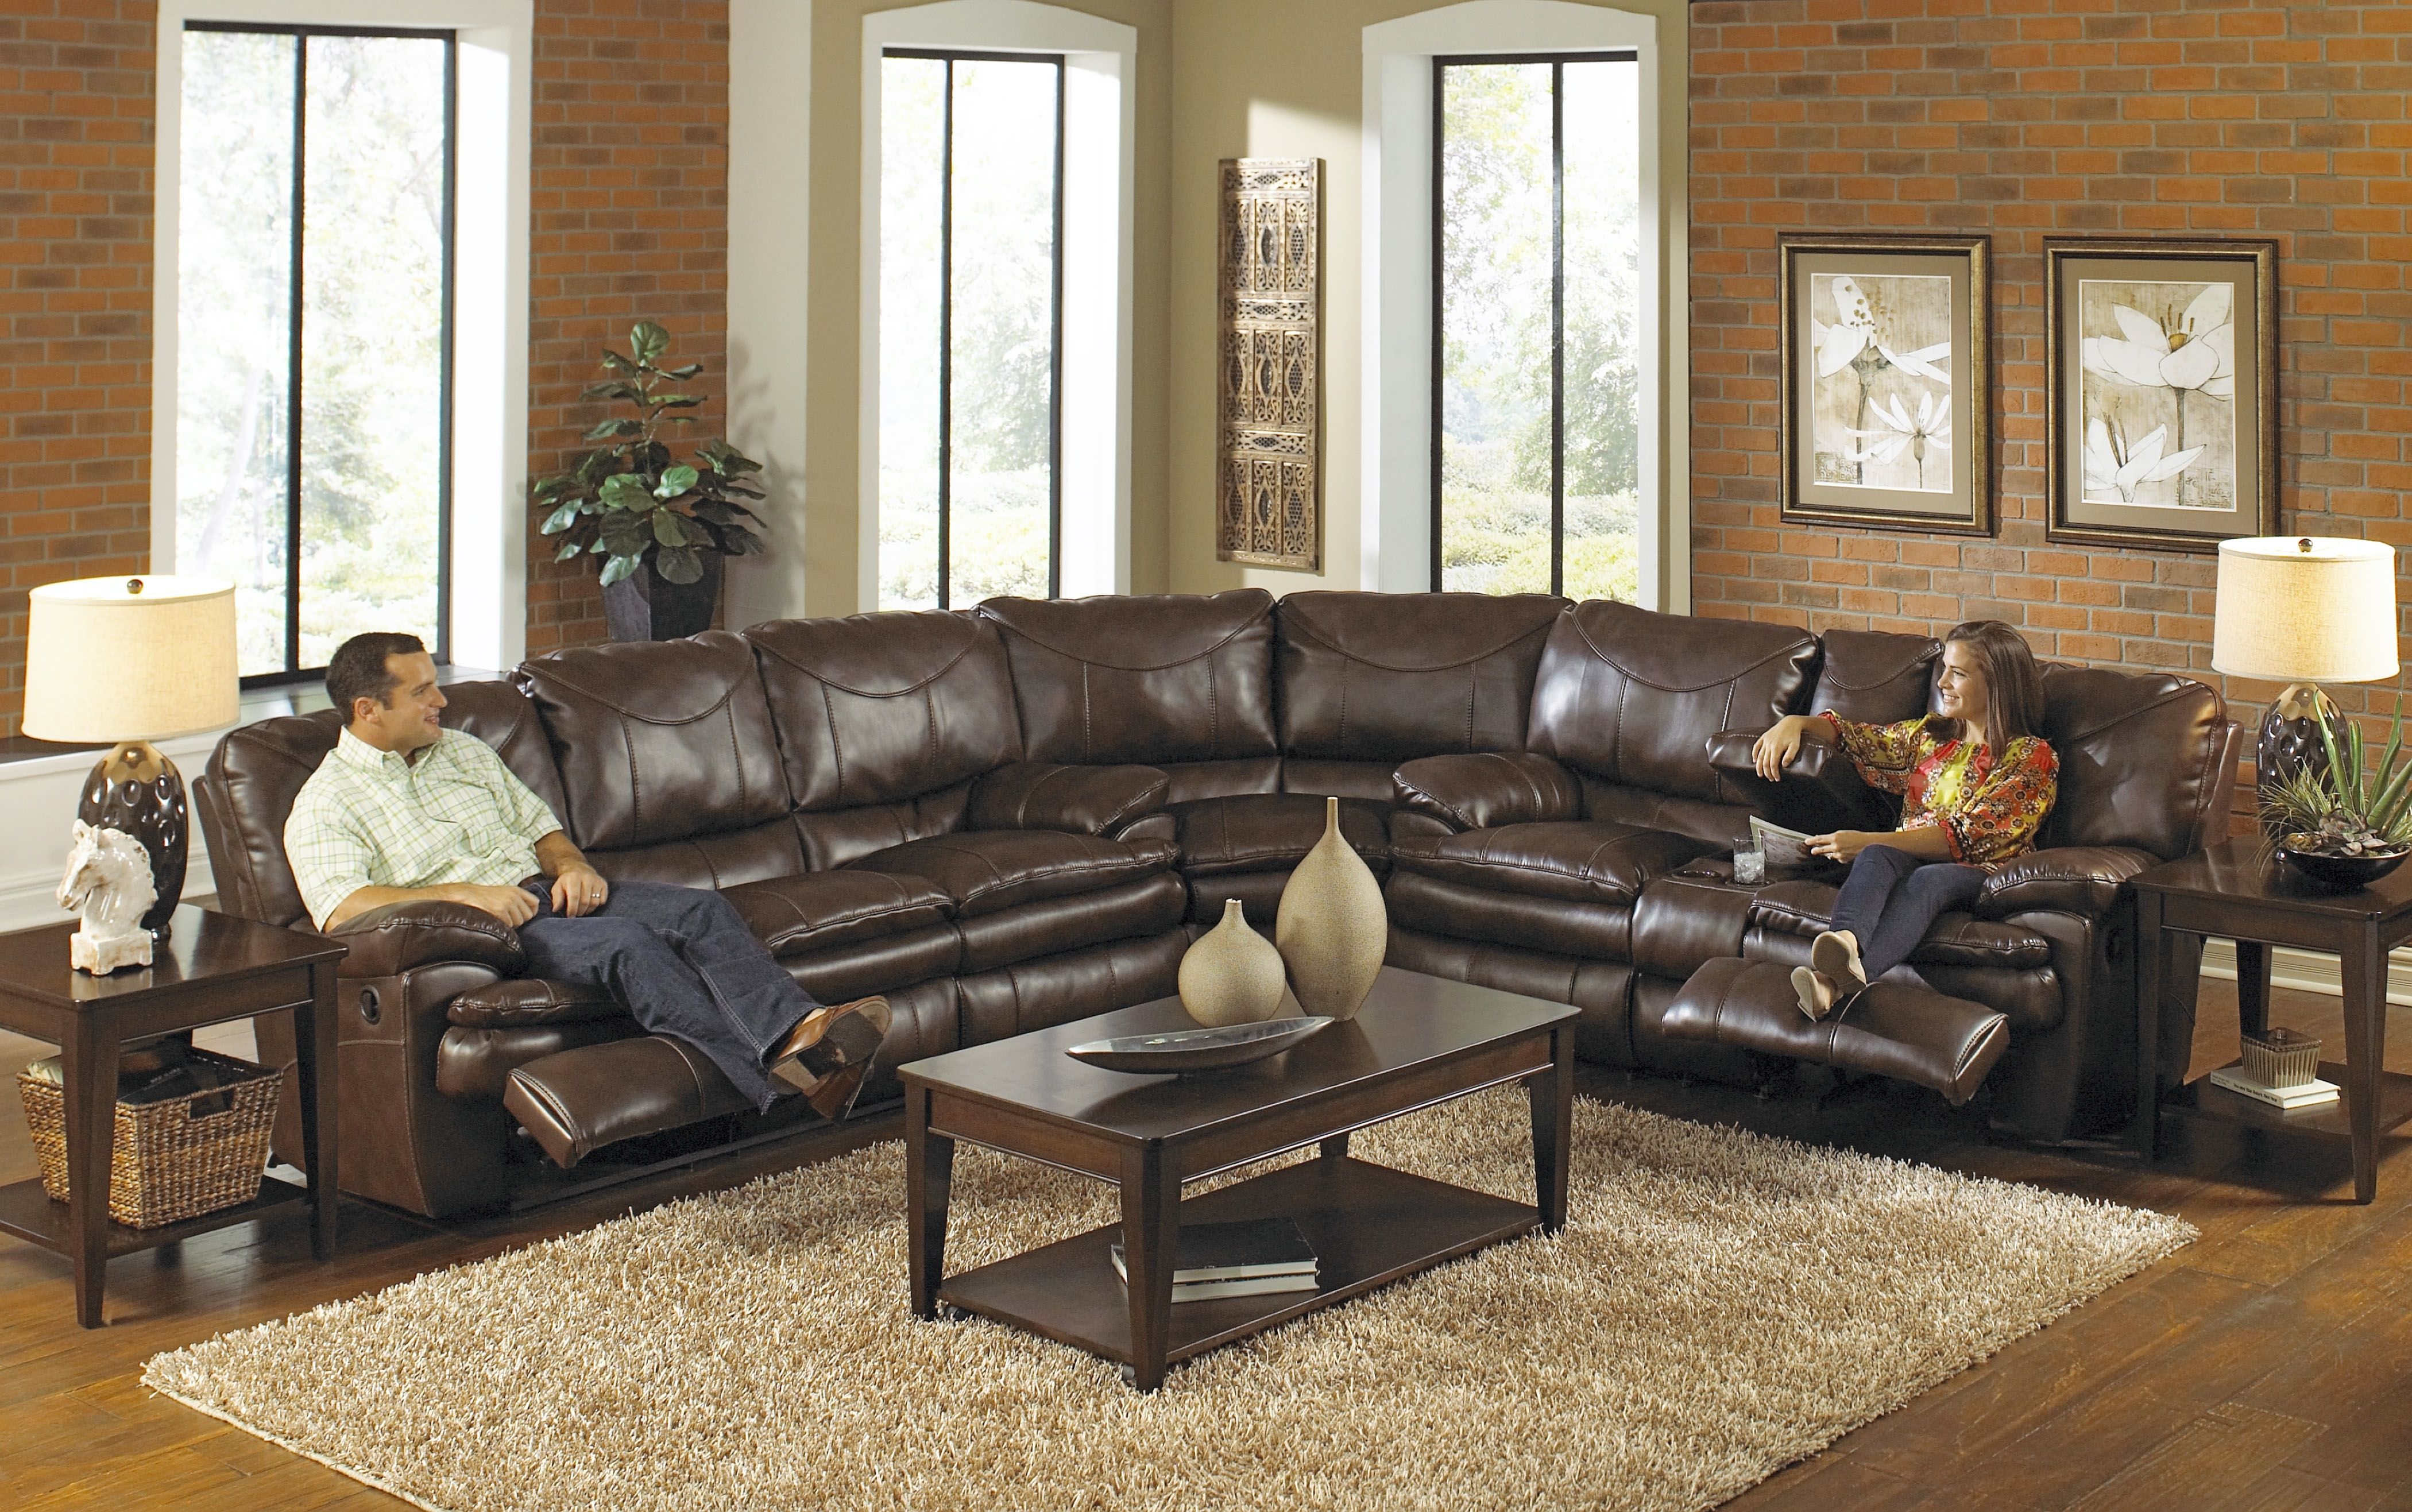 Buy Large Sectional Sofas Perfect For Your Large Living Room Throughout Large Sectional Sofas (Photo 7 of 10)